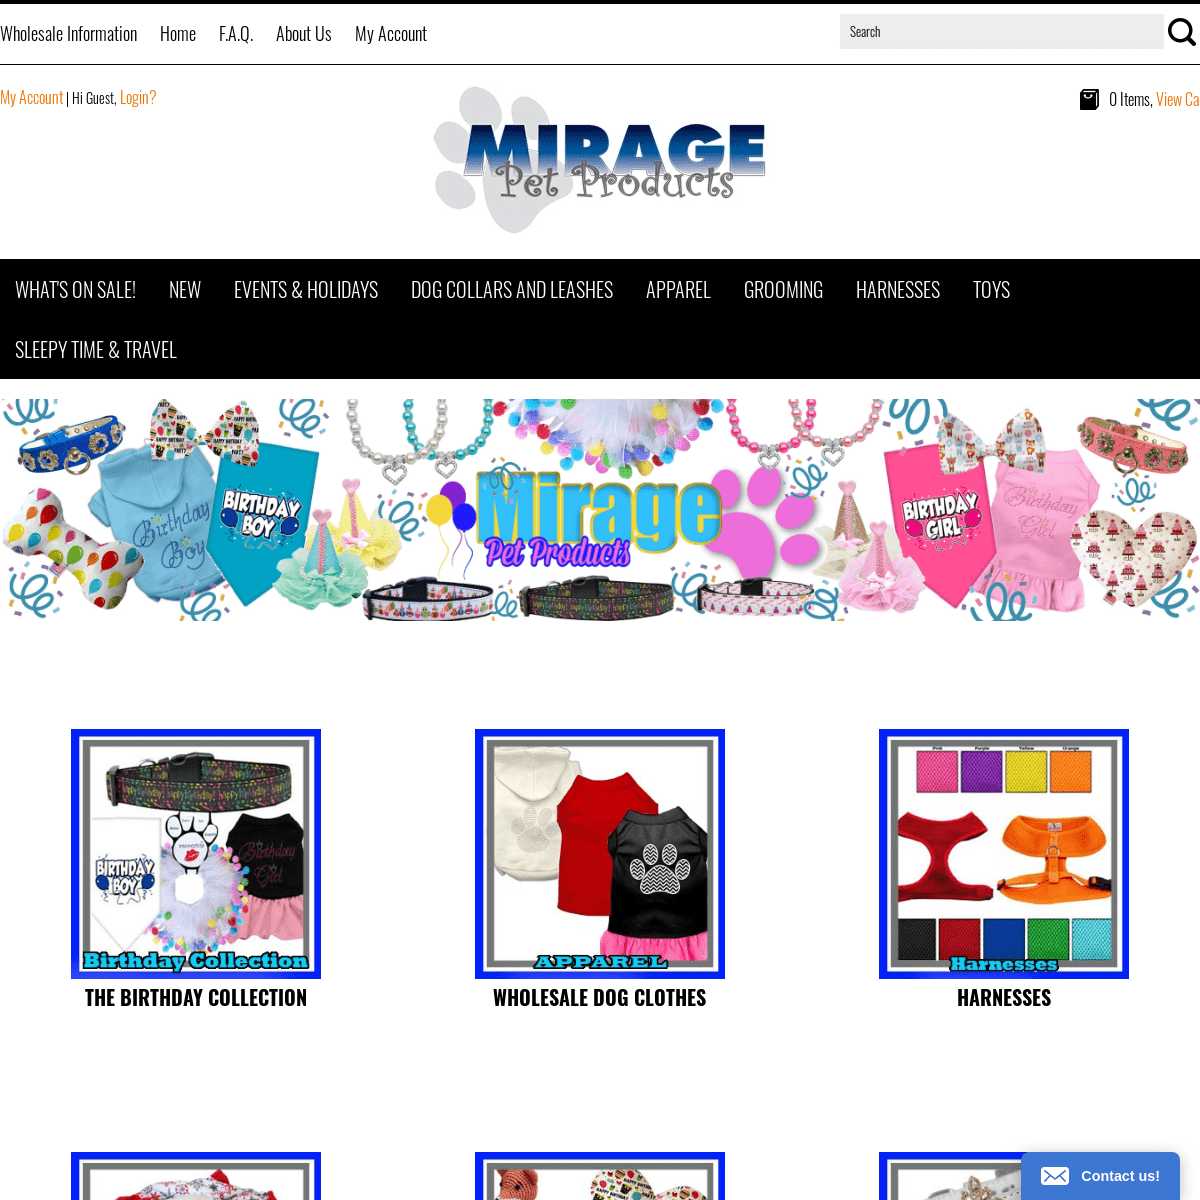 A complete backup of miragepetproducts.com